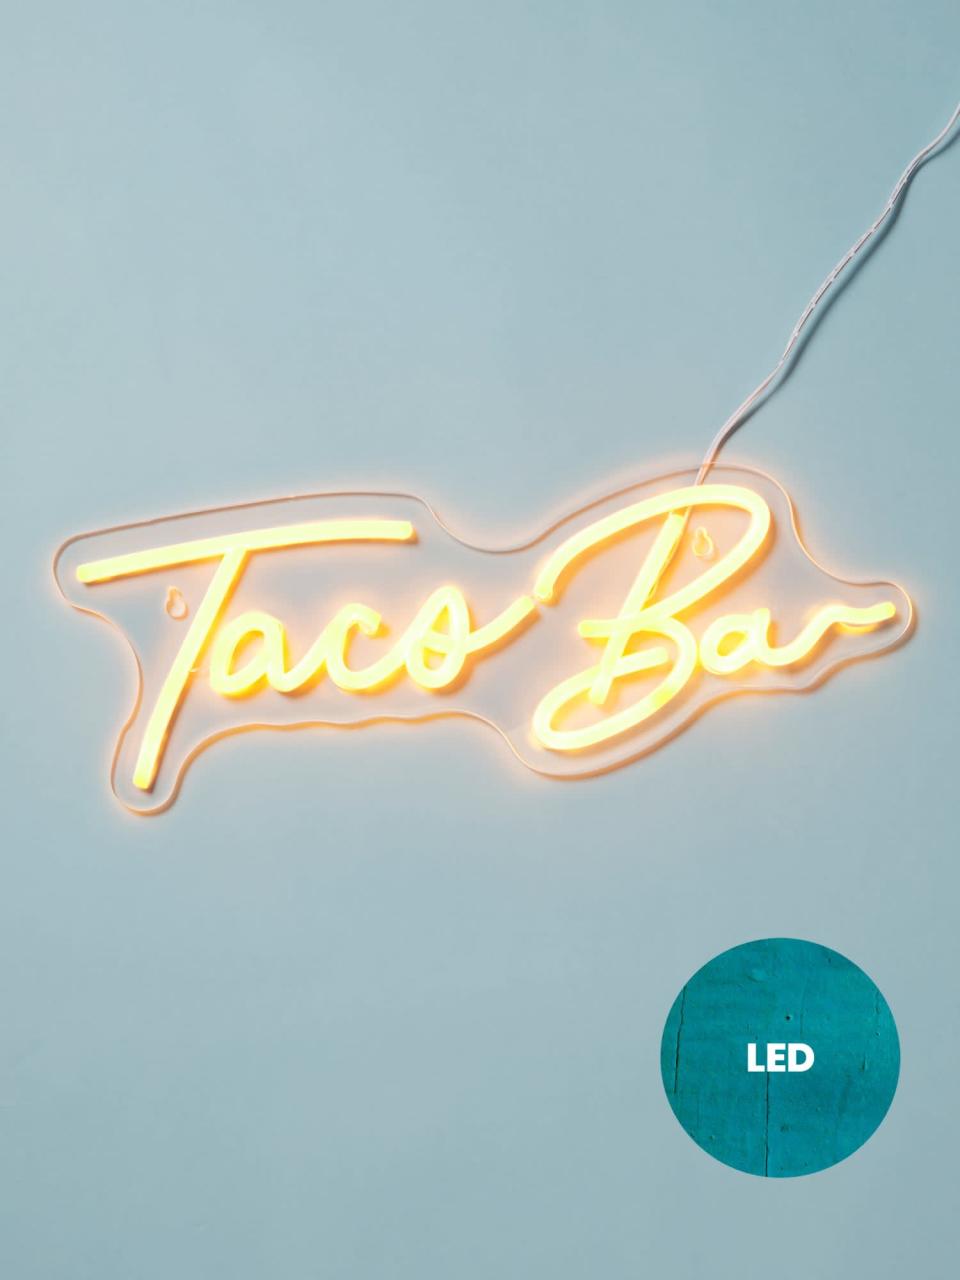 <p>The <span>Led Light Up Taco Bar Sign</span> ($40) will give your kitchen or dining room an elevated look and feel. The neon sign is ideal for those who make tacos on the regular. Available with a USB adaptor that plugs into the wall, you'll have your home "lit" in no time. </p>